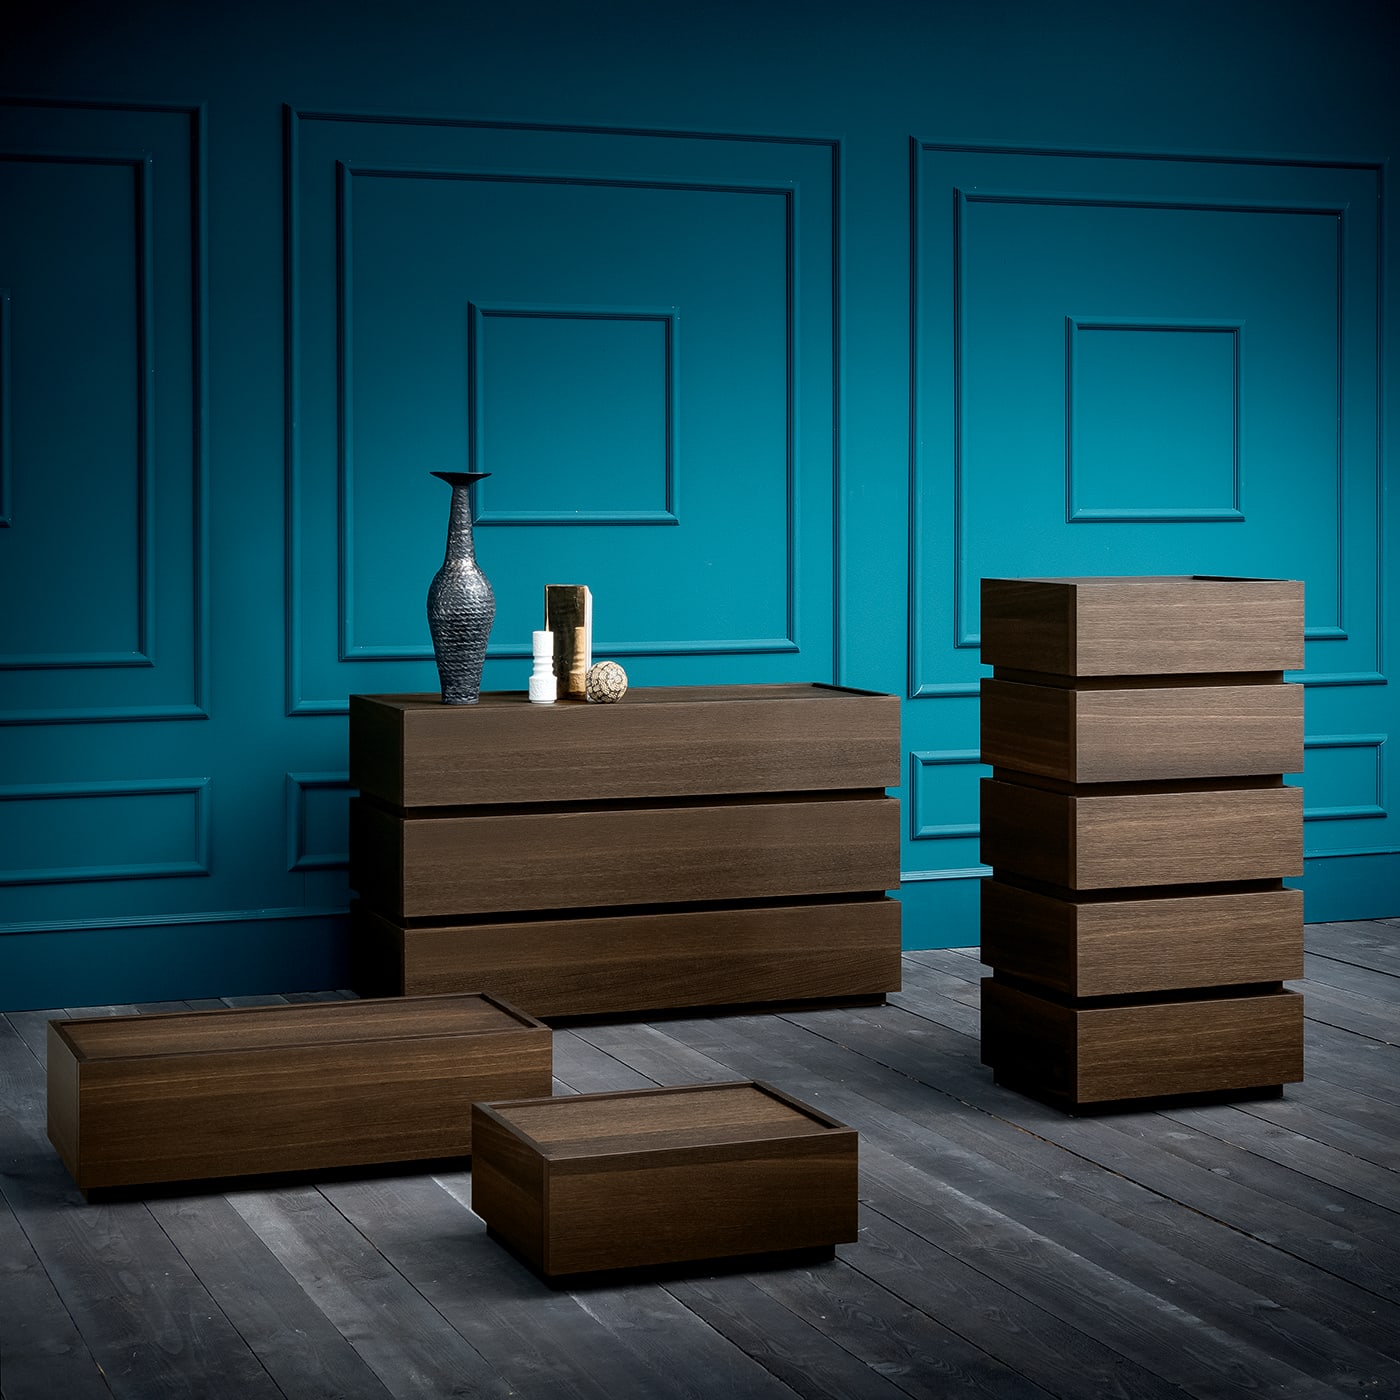 Super 5-Module Chest of Drawers - Dall'Agnese